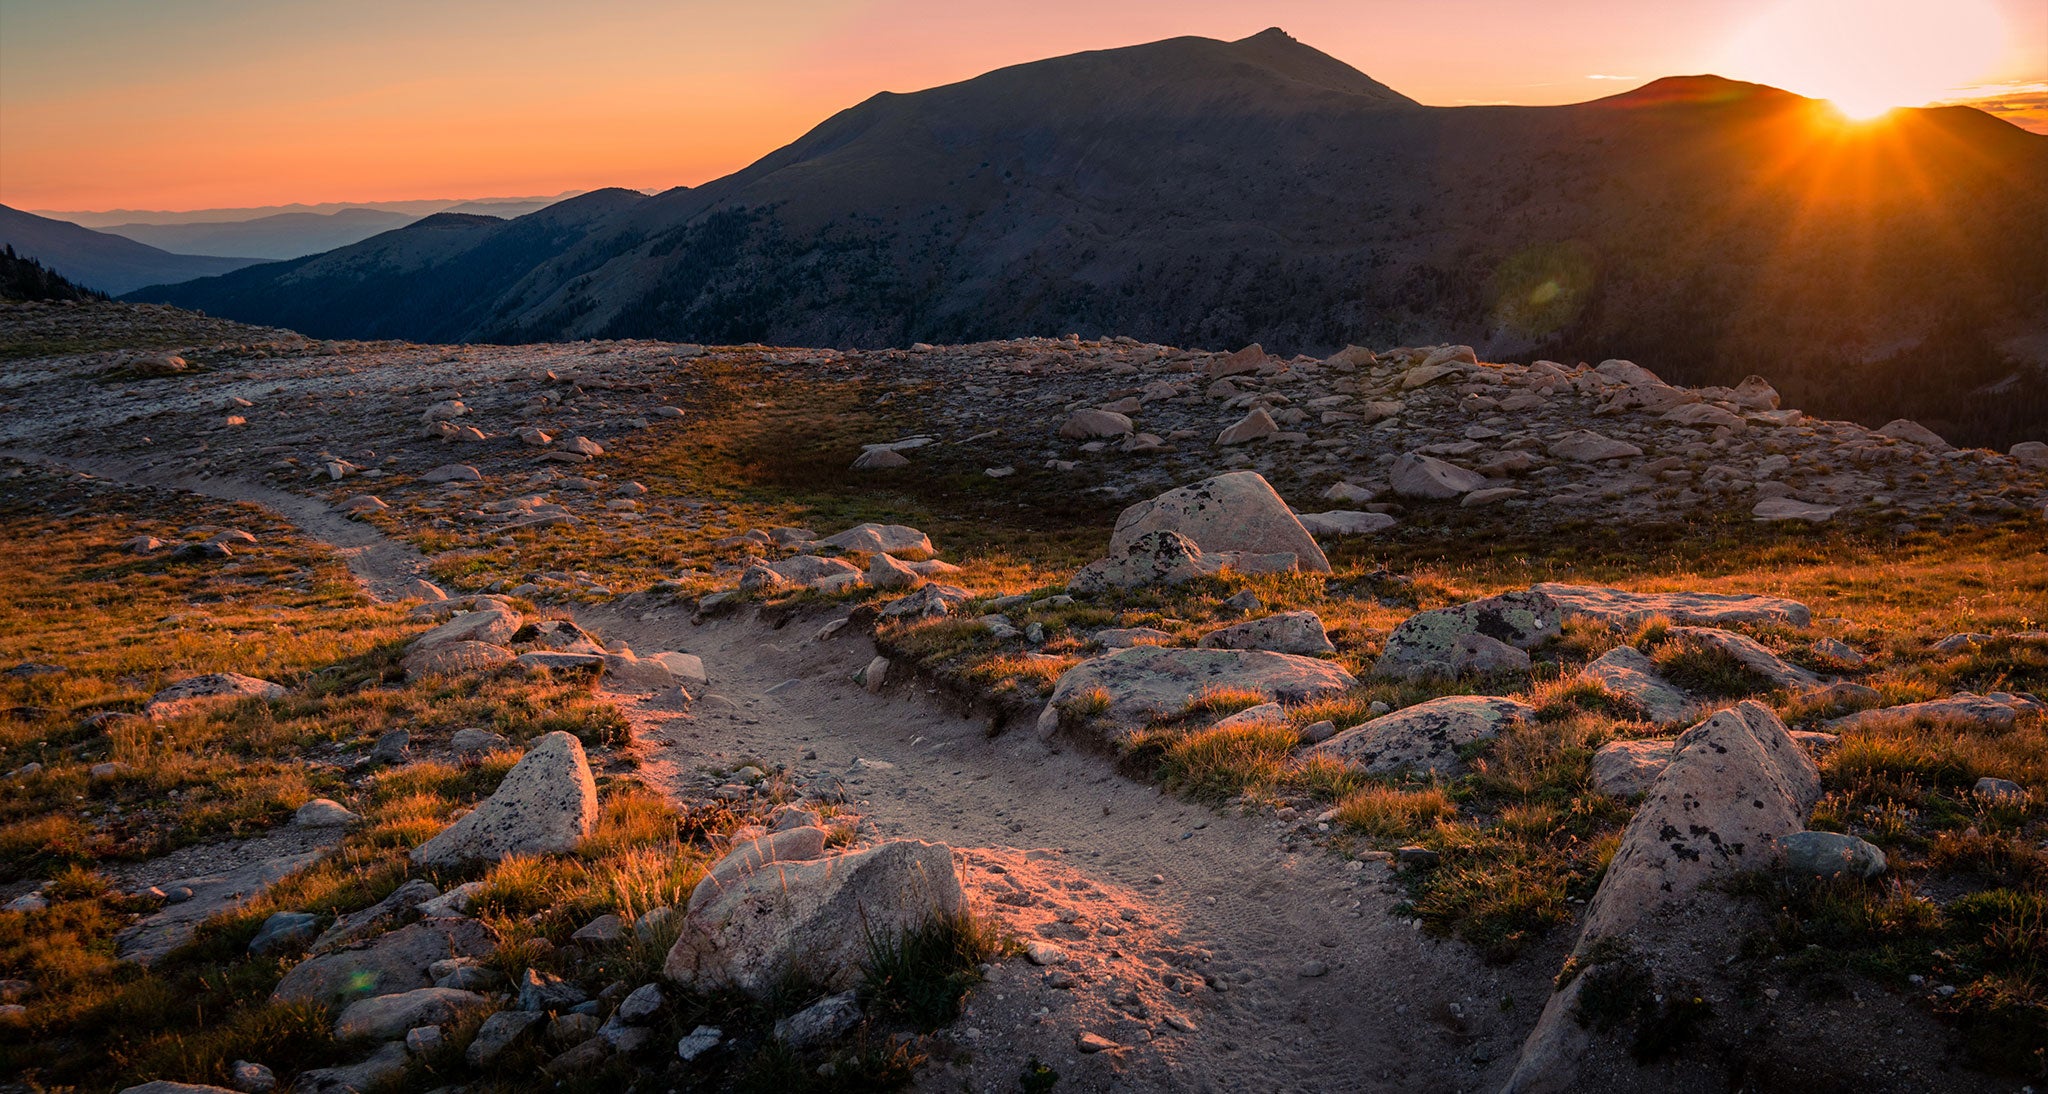 Sunset over a rocky trail